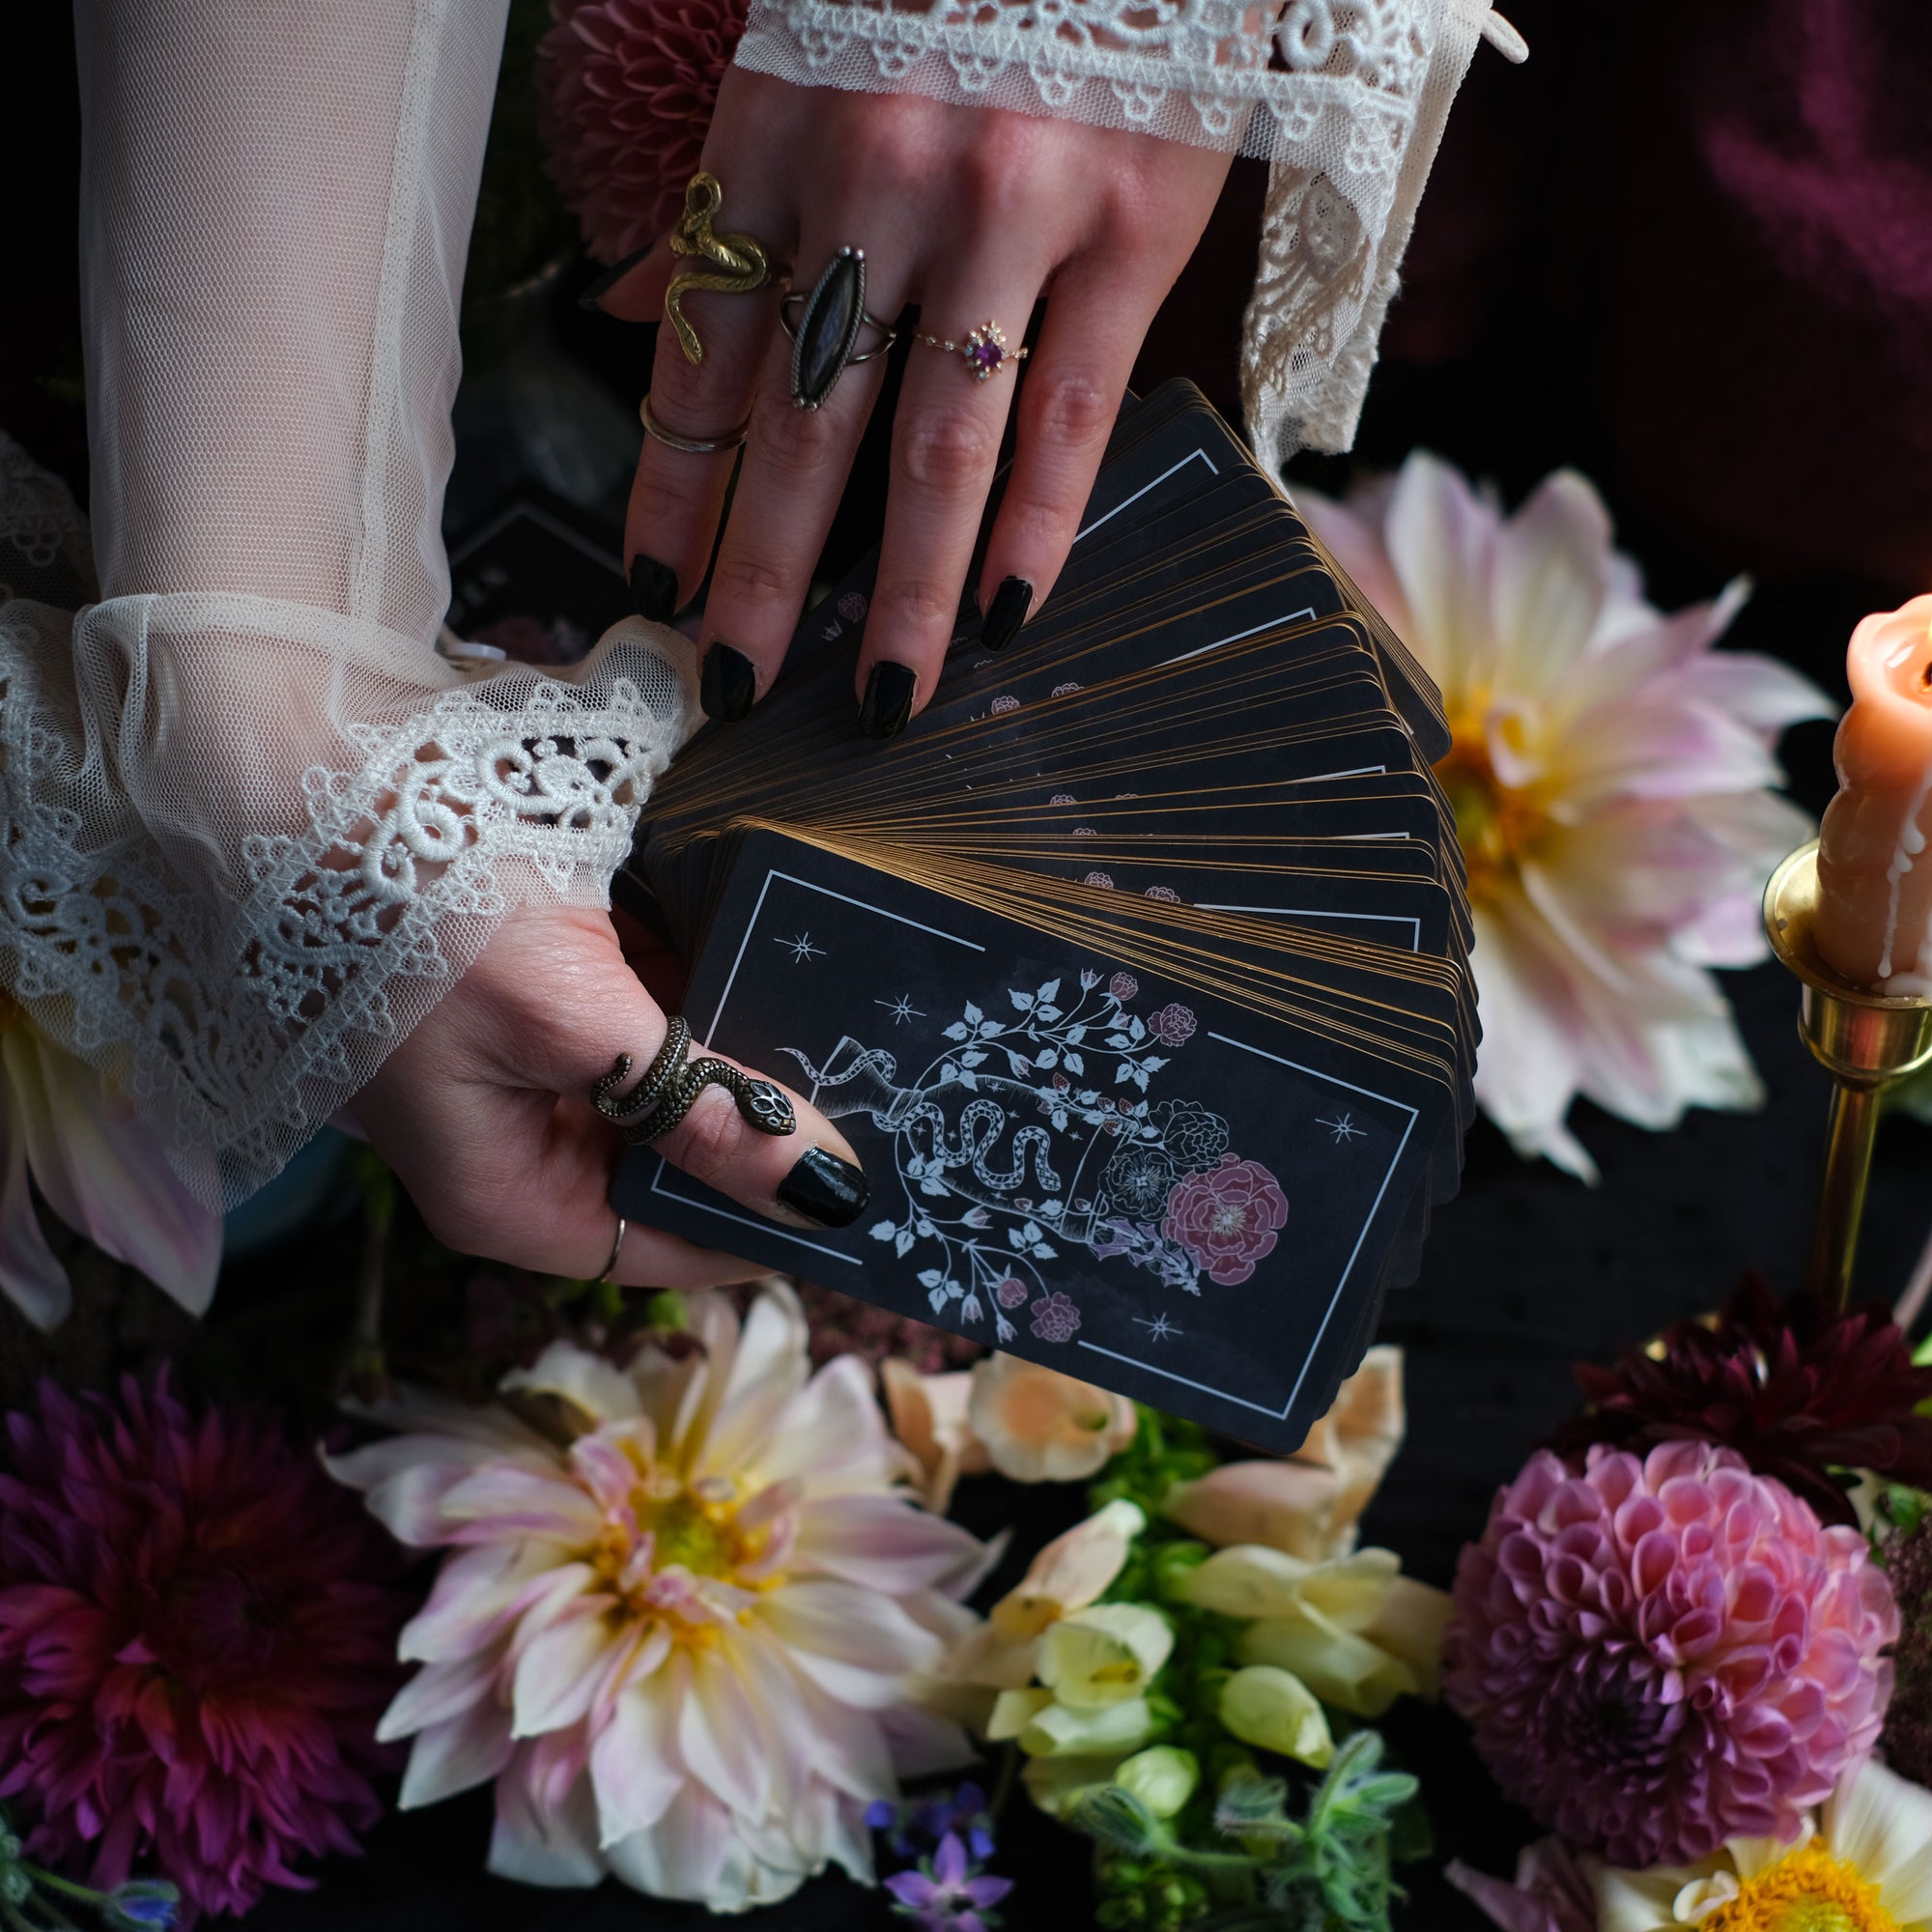 The Maiden Botanical Oracle is wedded to independence and weeded of despondence. Through 68 cards and bound guidebook, earthborn botanical oracles and the Tarot's Major Arcana we delve into the plants in our garden. 